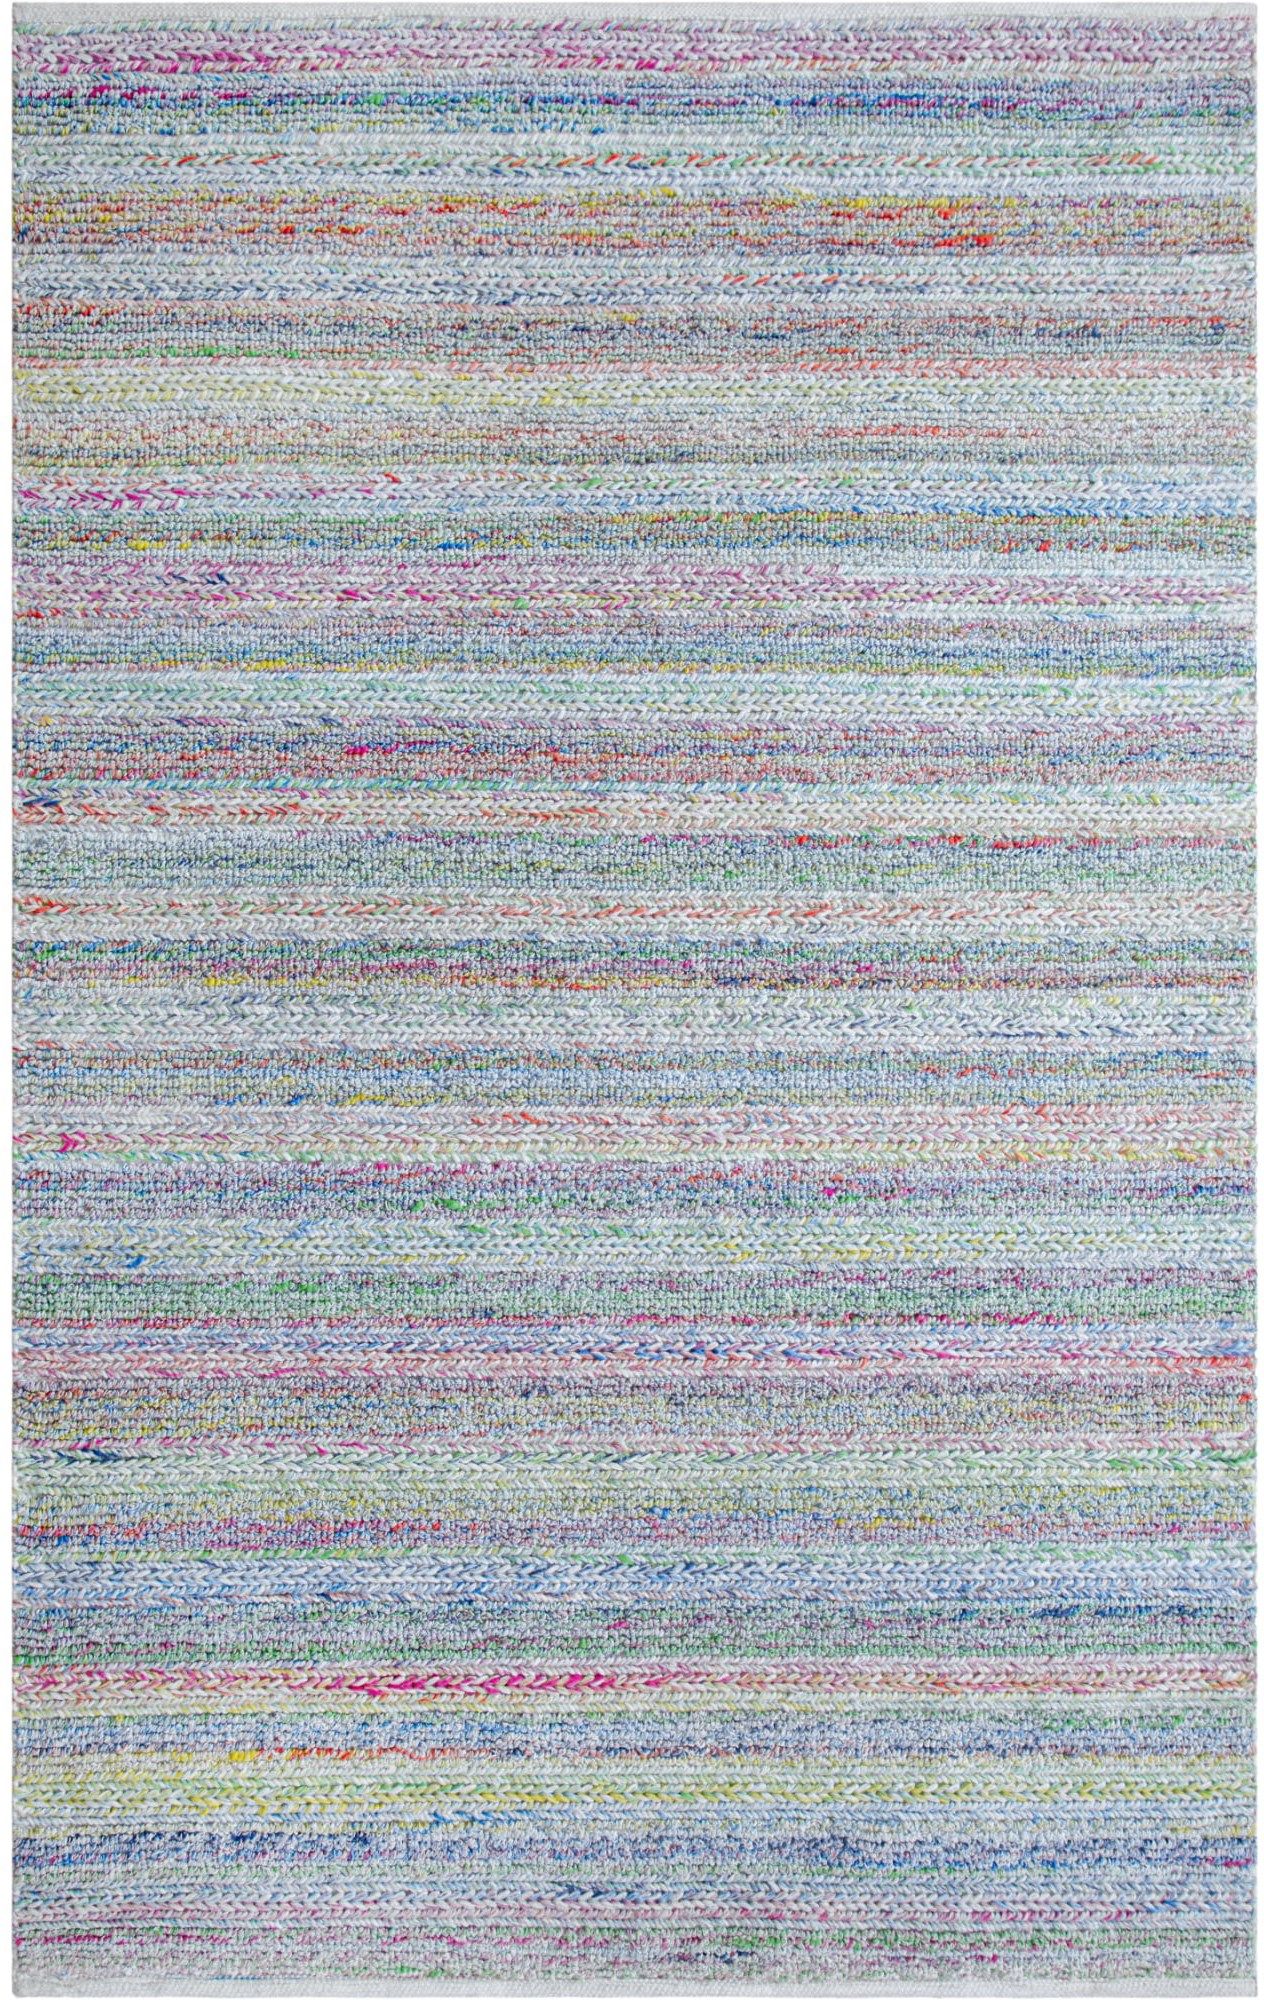 Company C Confetti 11005 Contemporary / Modern Area Rugs | Rugs Direct Regarding Finsbury Runner Rugs (View 12 of 15)